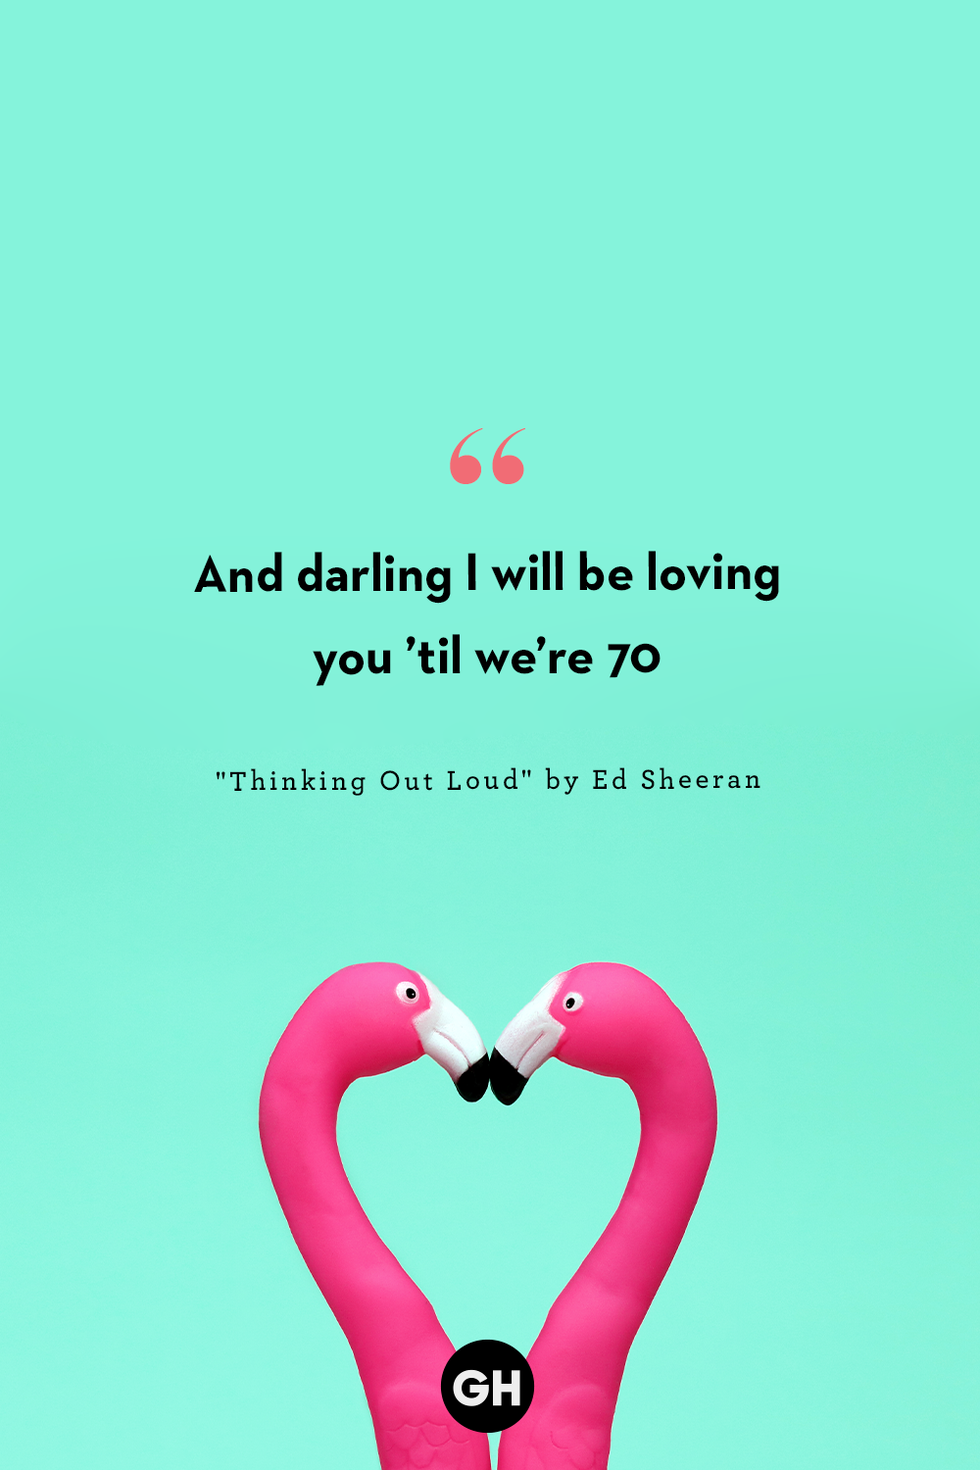 couples quotes for instagram two flamingos touching noses on teal background with black text